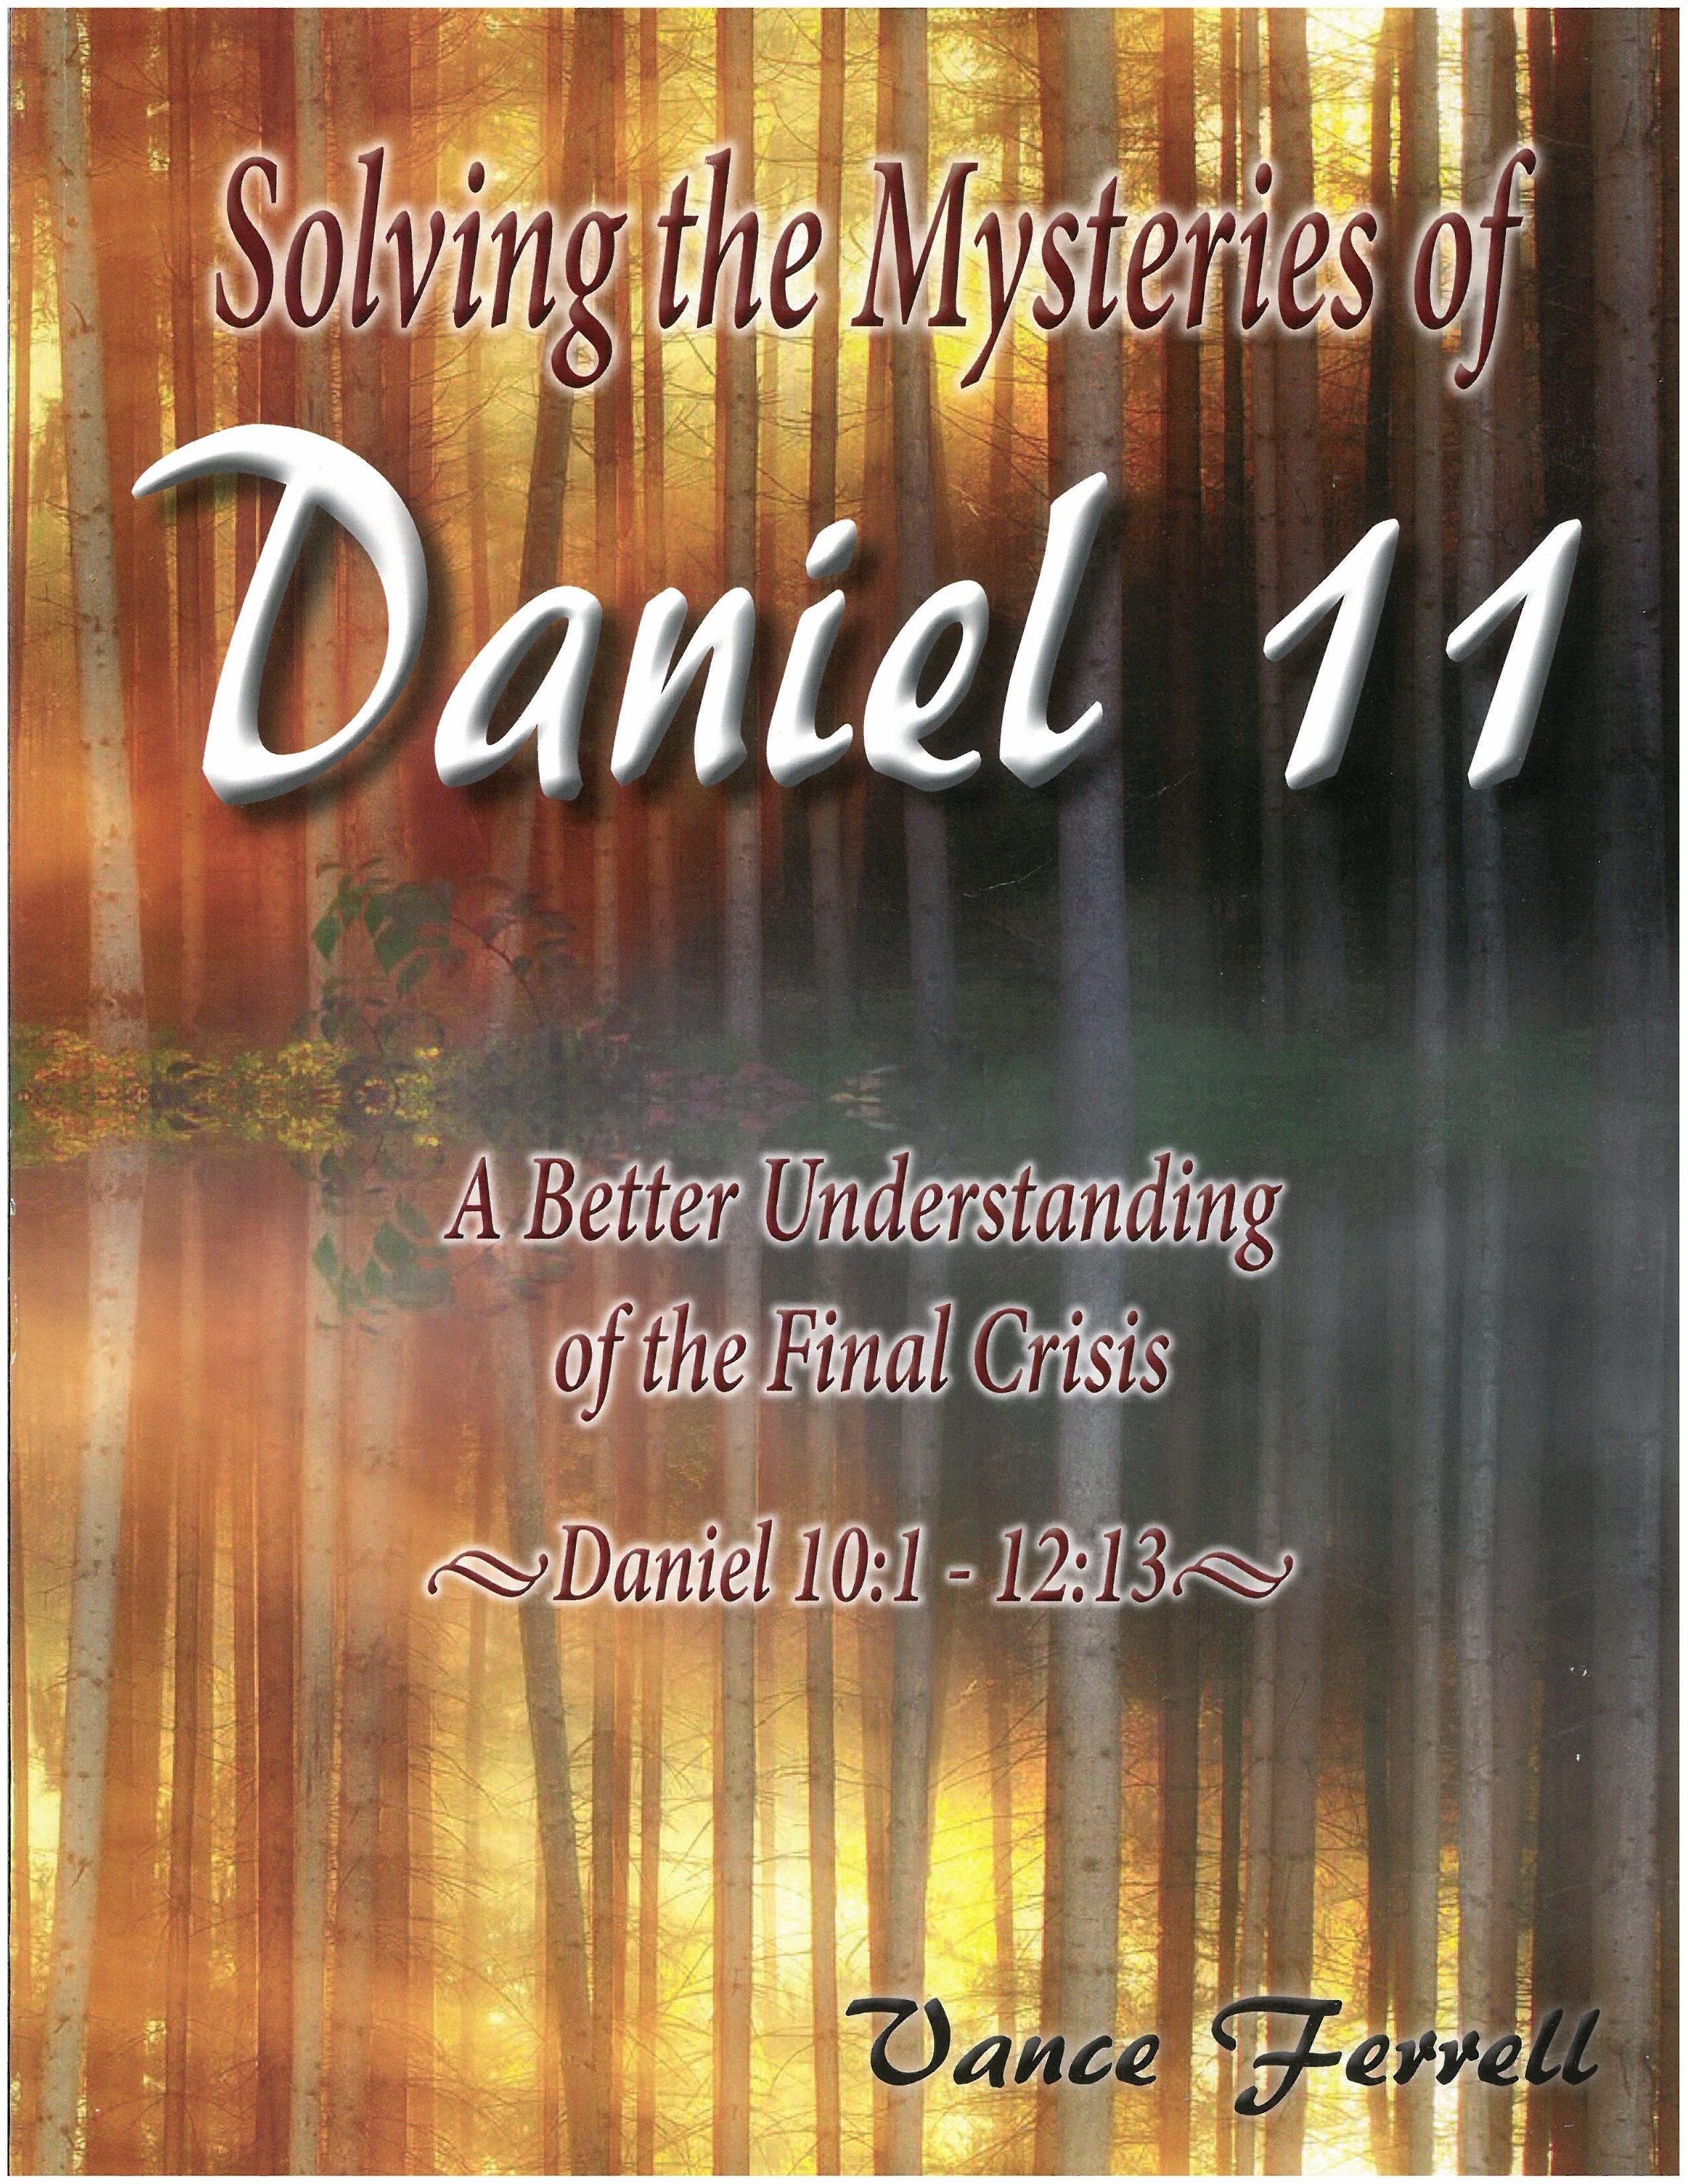 Solving the Mysteries of Daniel 11